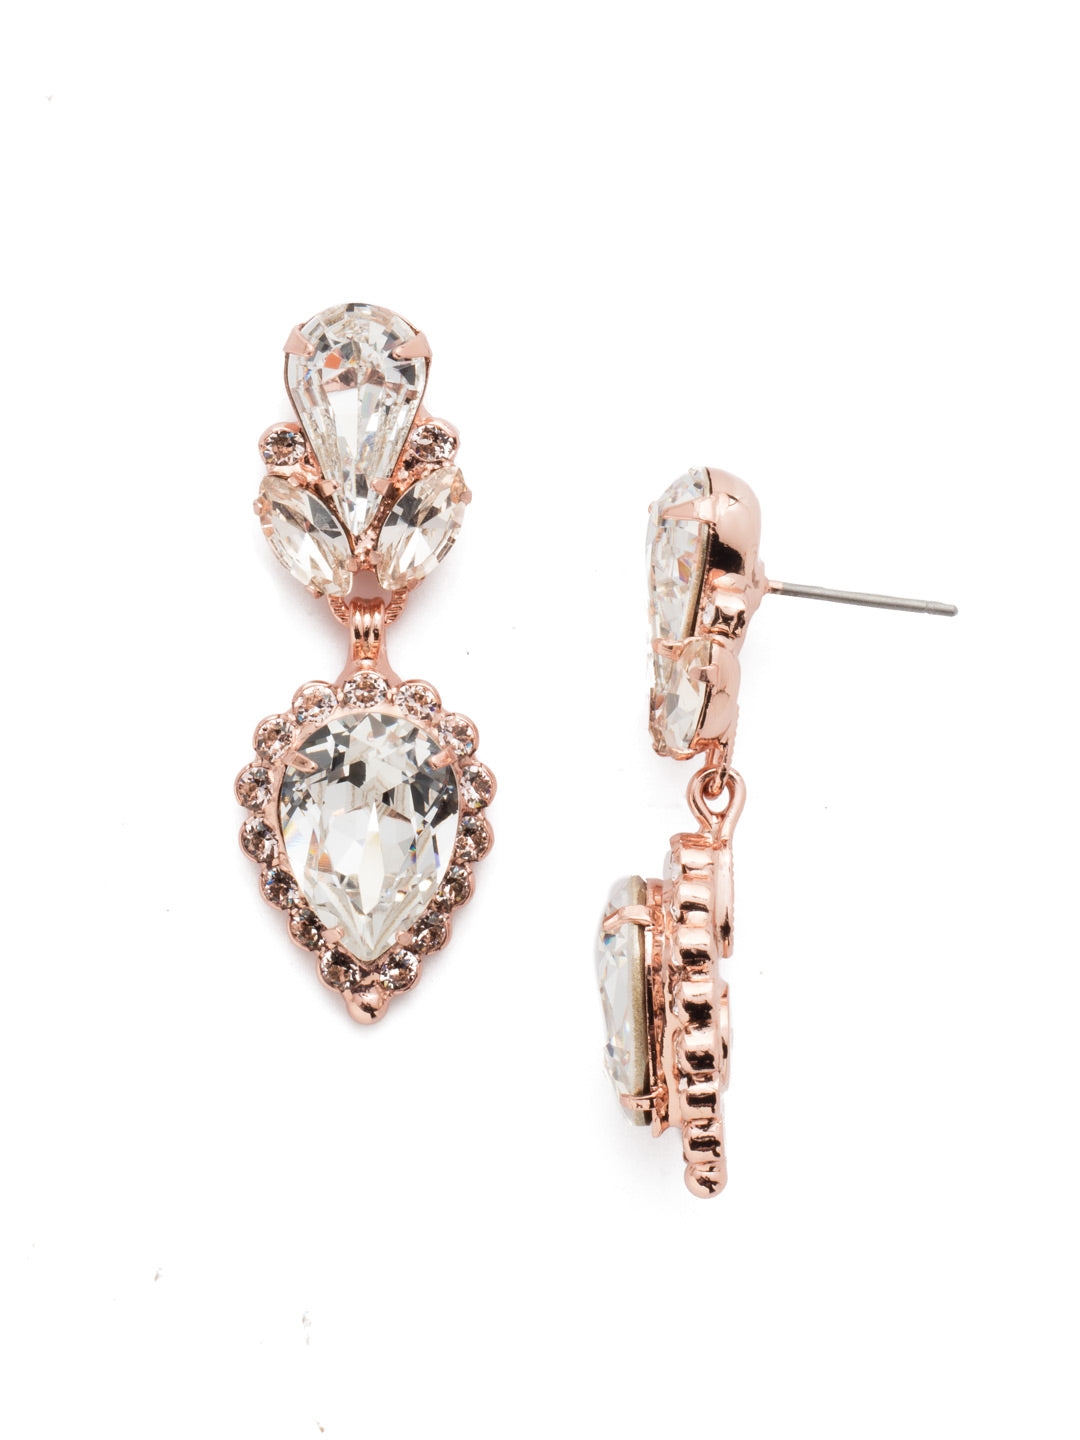 Sea Change Dangle Earrings - EDZ38RGSNB - <p>A cluster of crystals anchors this teardrop crystal in a stunning antique finish perfect to add a bit of sparkle to your look. From Sorrelli's Snow Bunny collection in our Rose Gold-tone finish.</p>